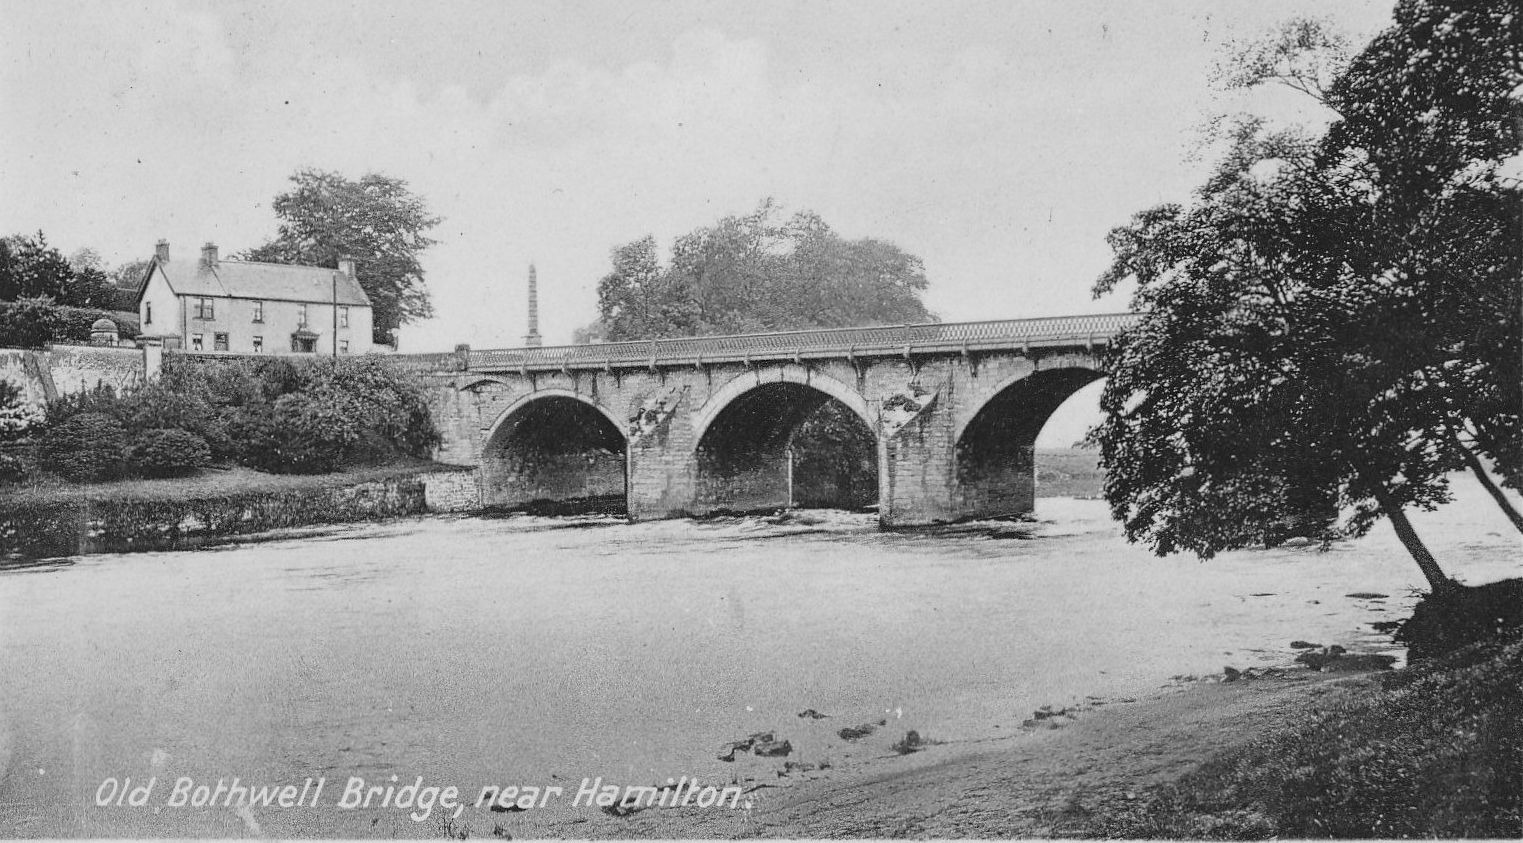 Old photo of Bothwell Bridge over the River Clyde